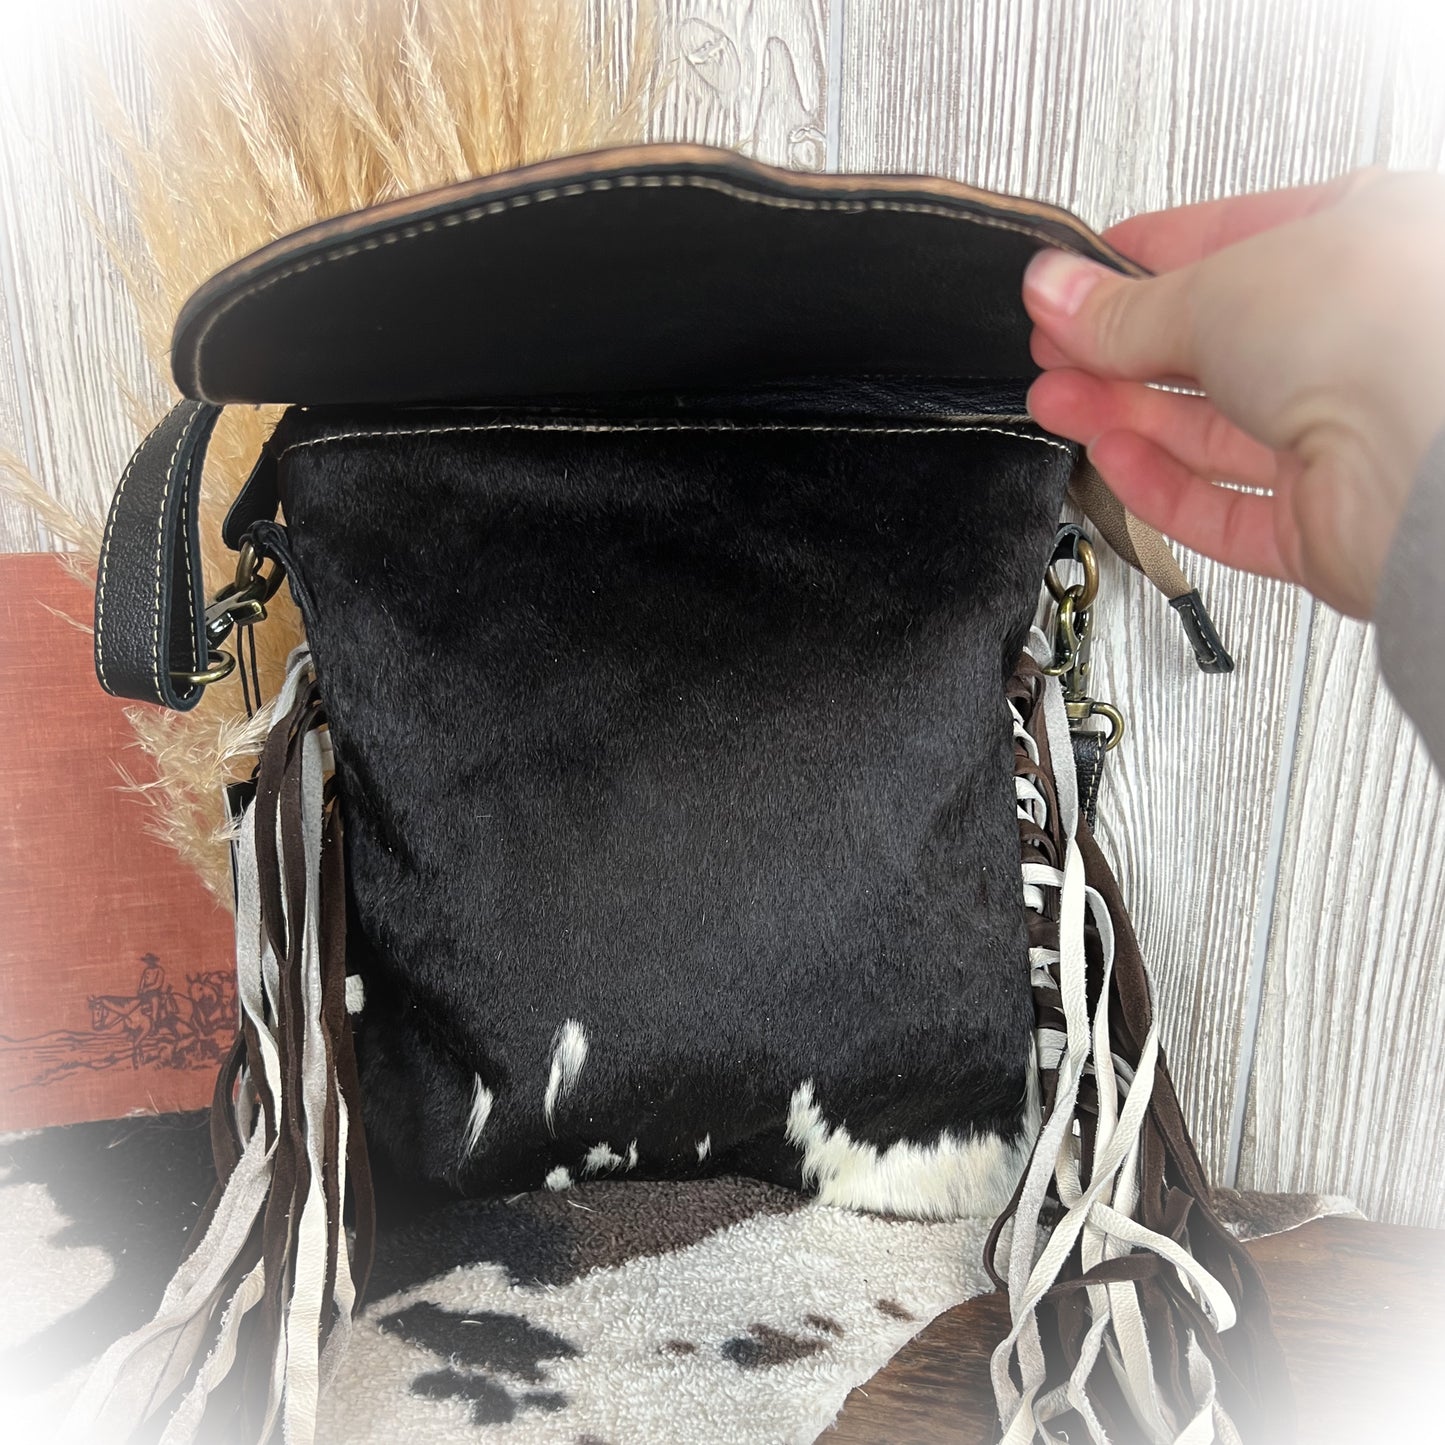 Bagon Concealed Carry Purse